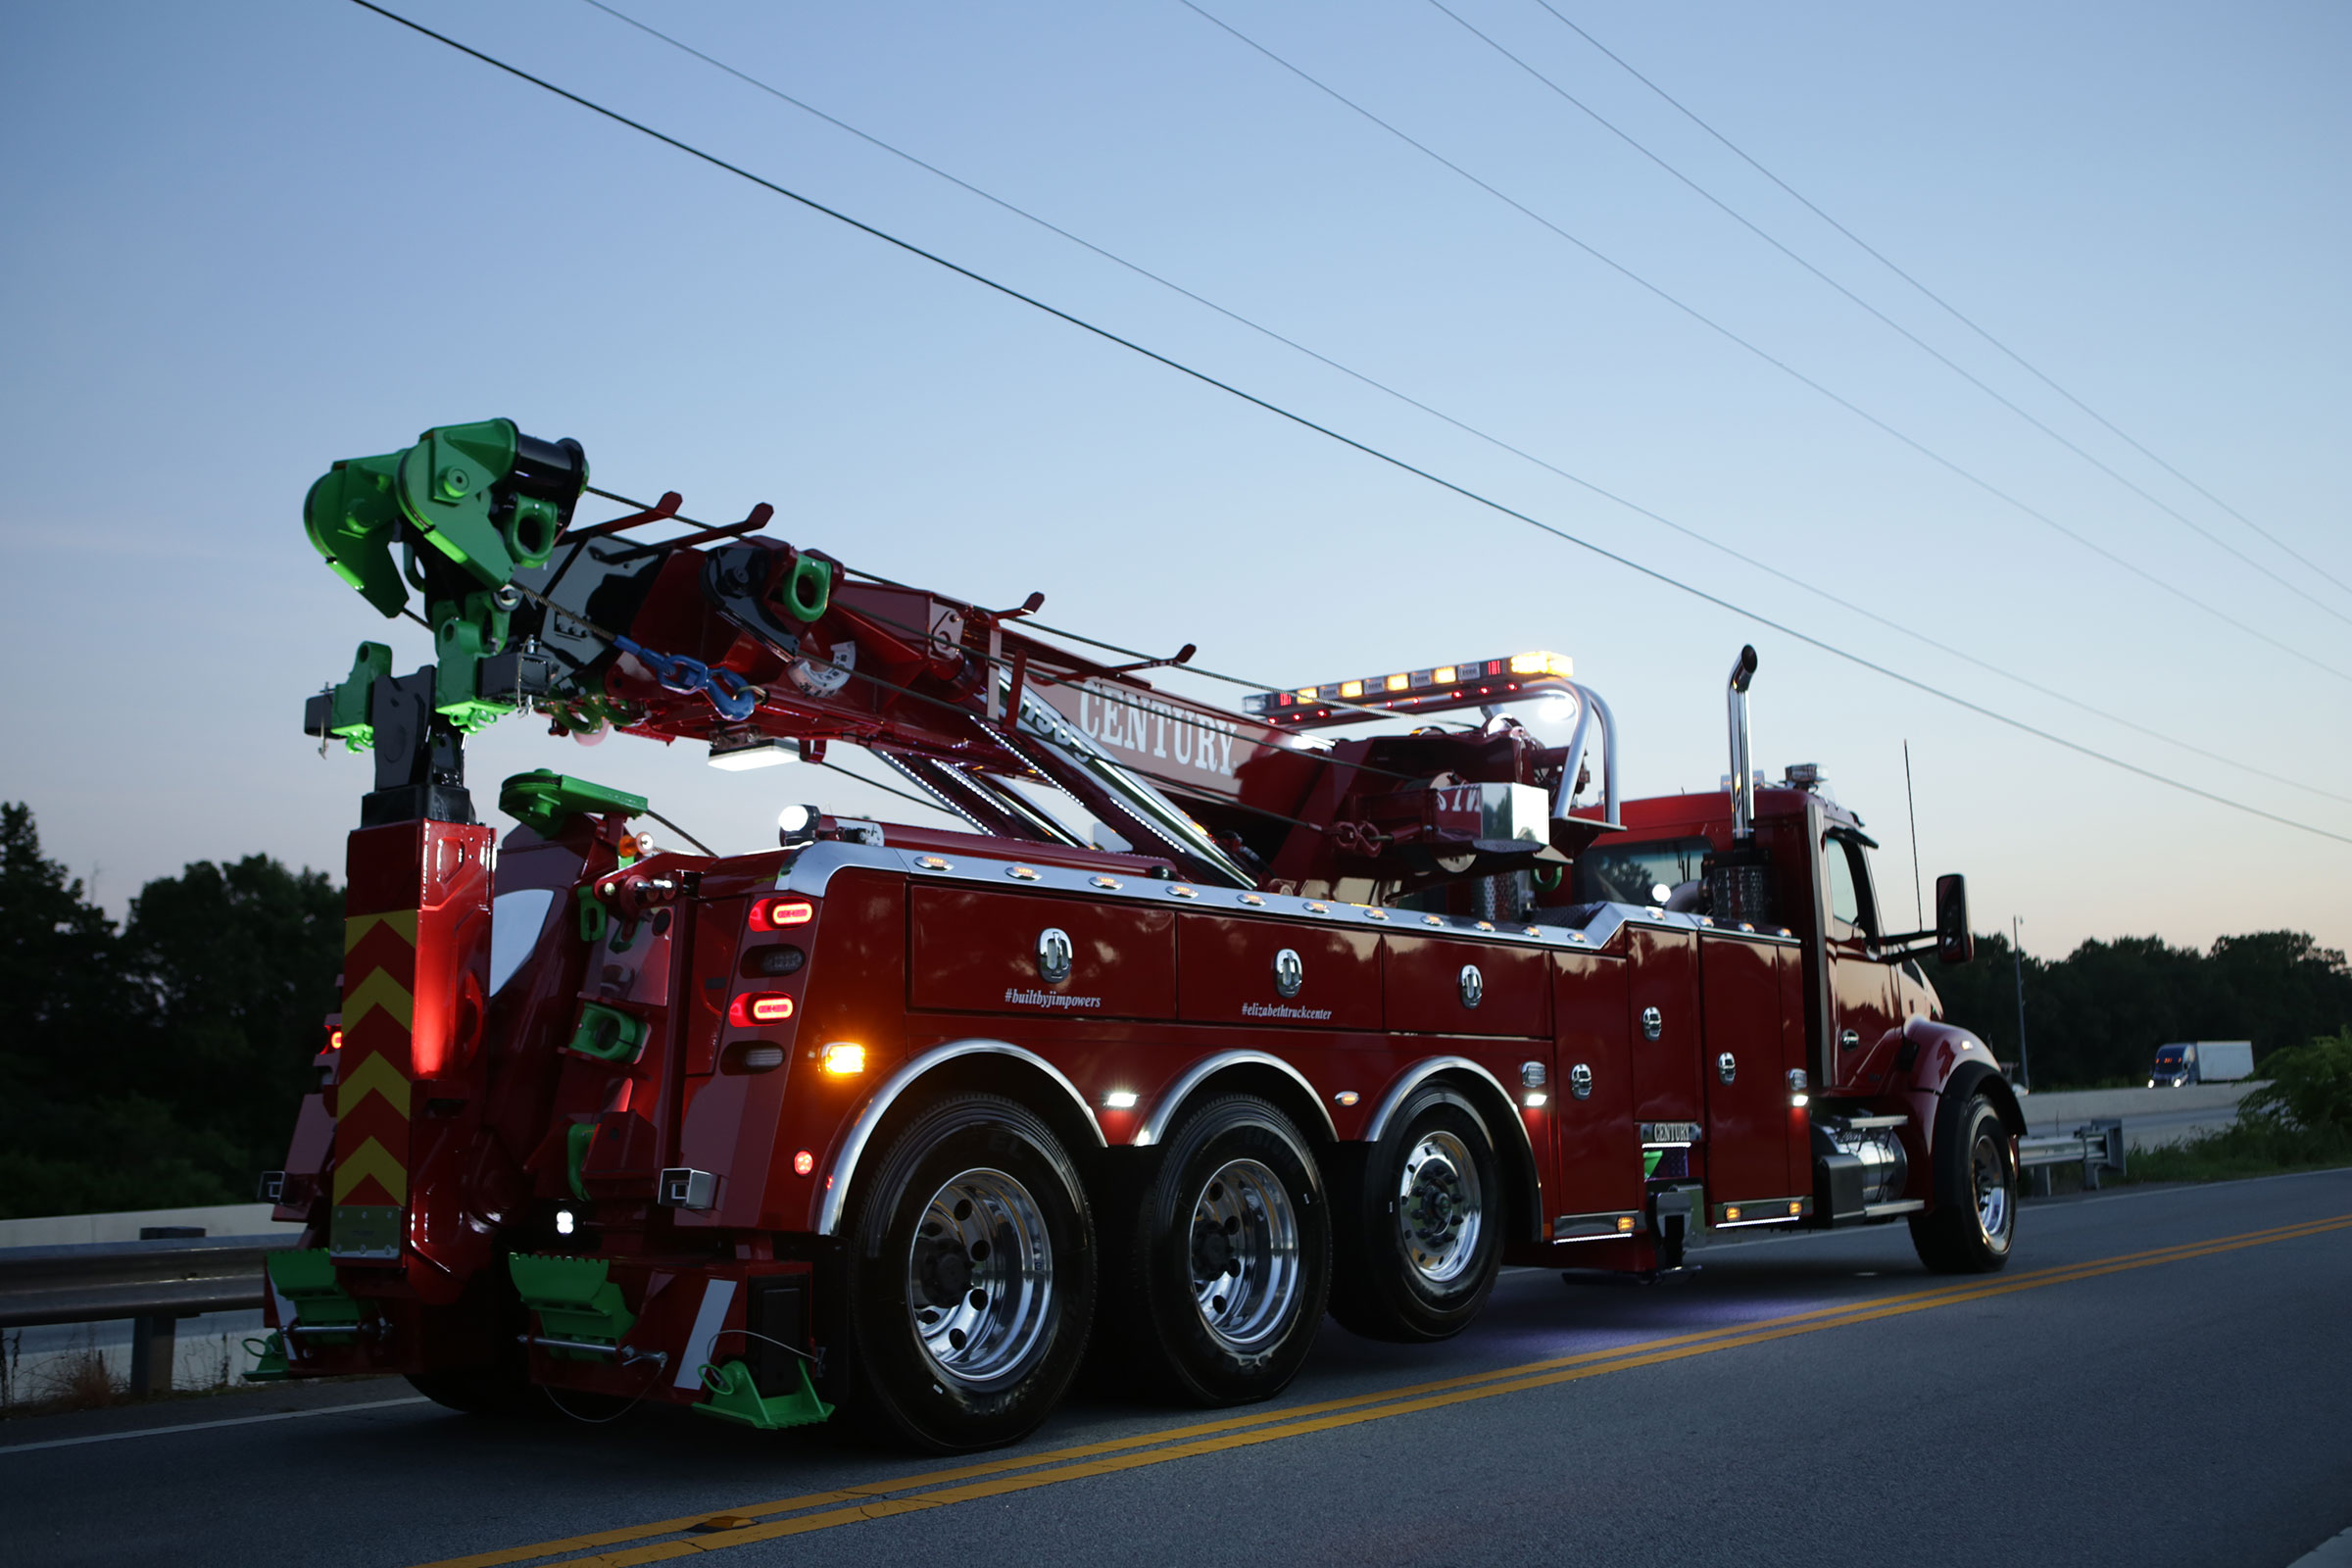 Over the road recovery solutions for your highway towing and recovery fleet.